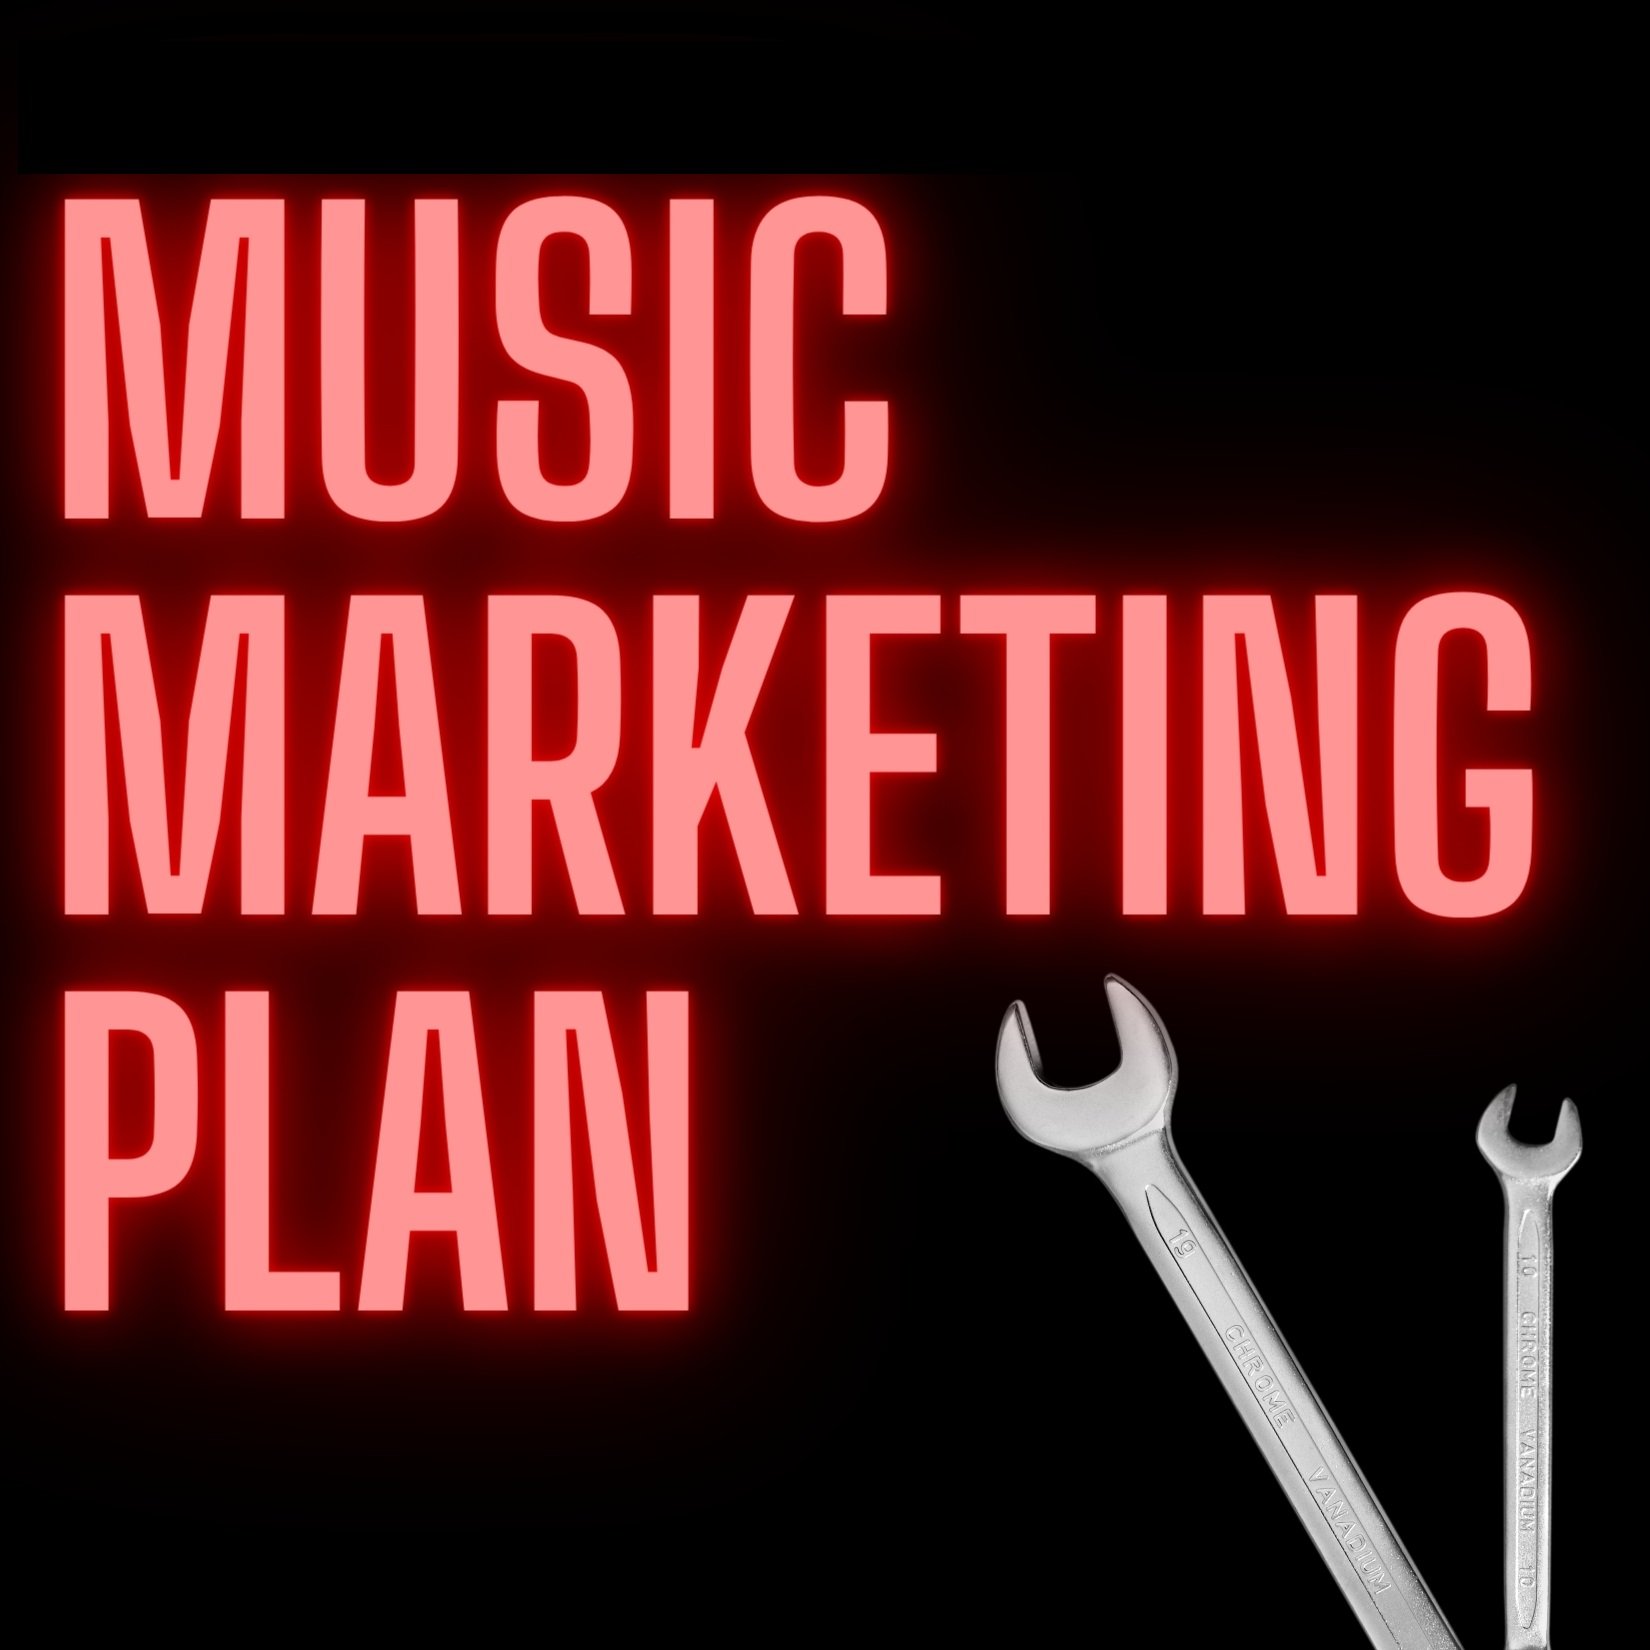 💎More Fans Agency
🏆Music Promo Packages + Free Trials
🎯Lifetime Guarantee included
Go: ➡️ https://t.co/7BS6ZNSdOZ